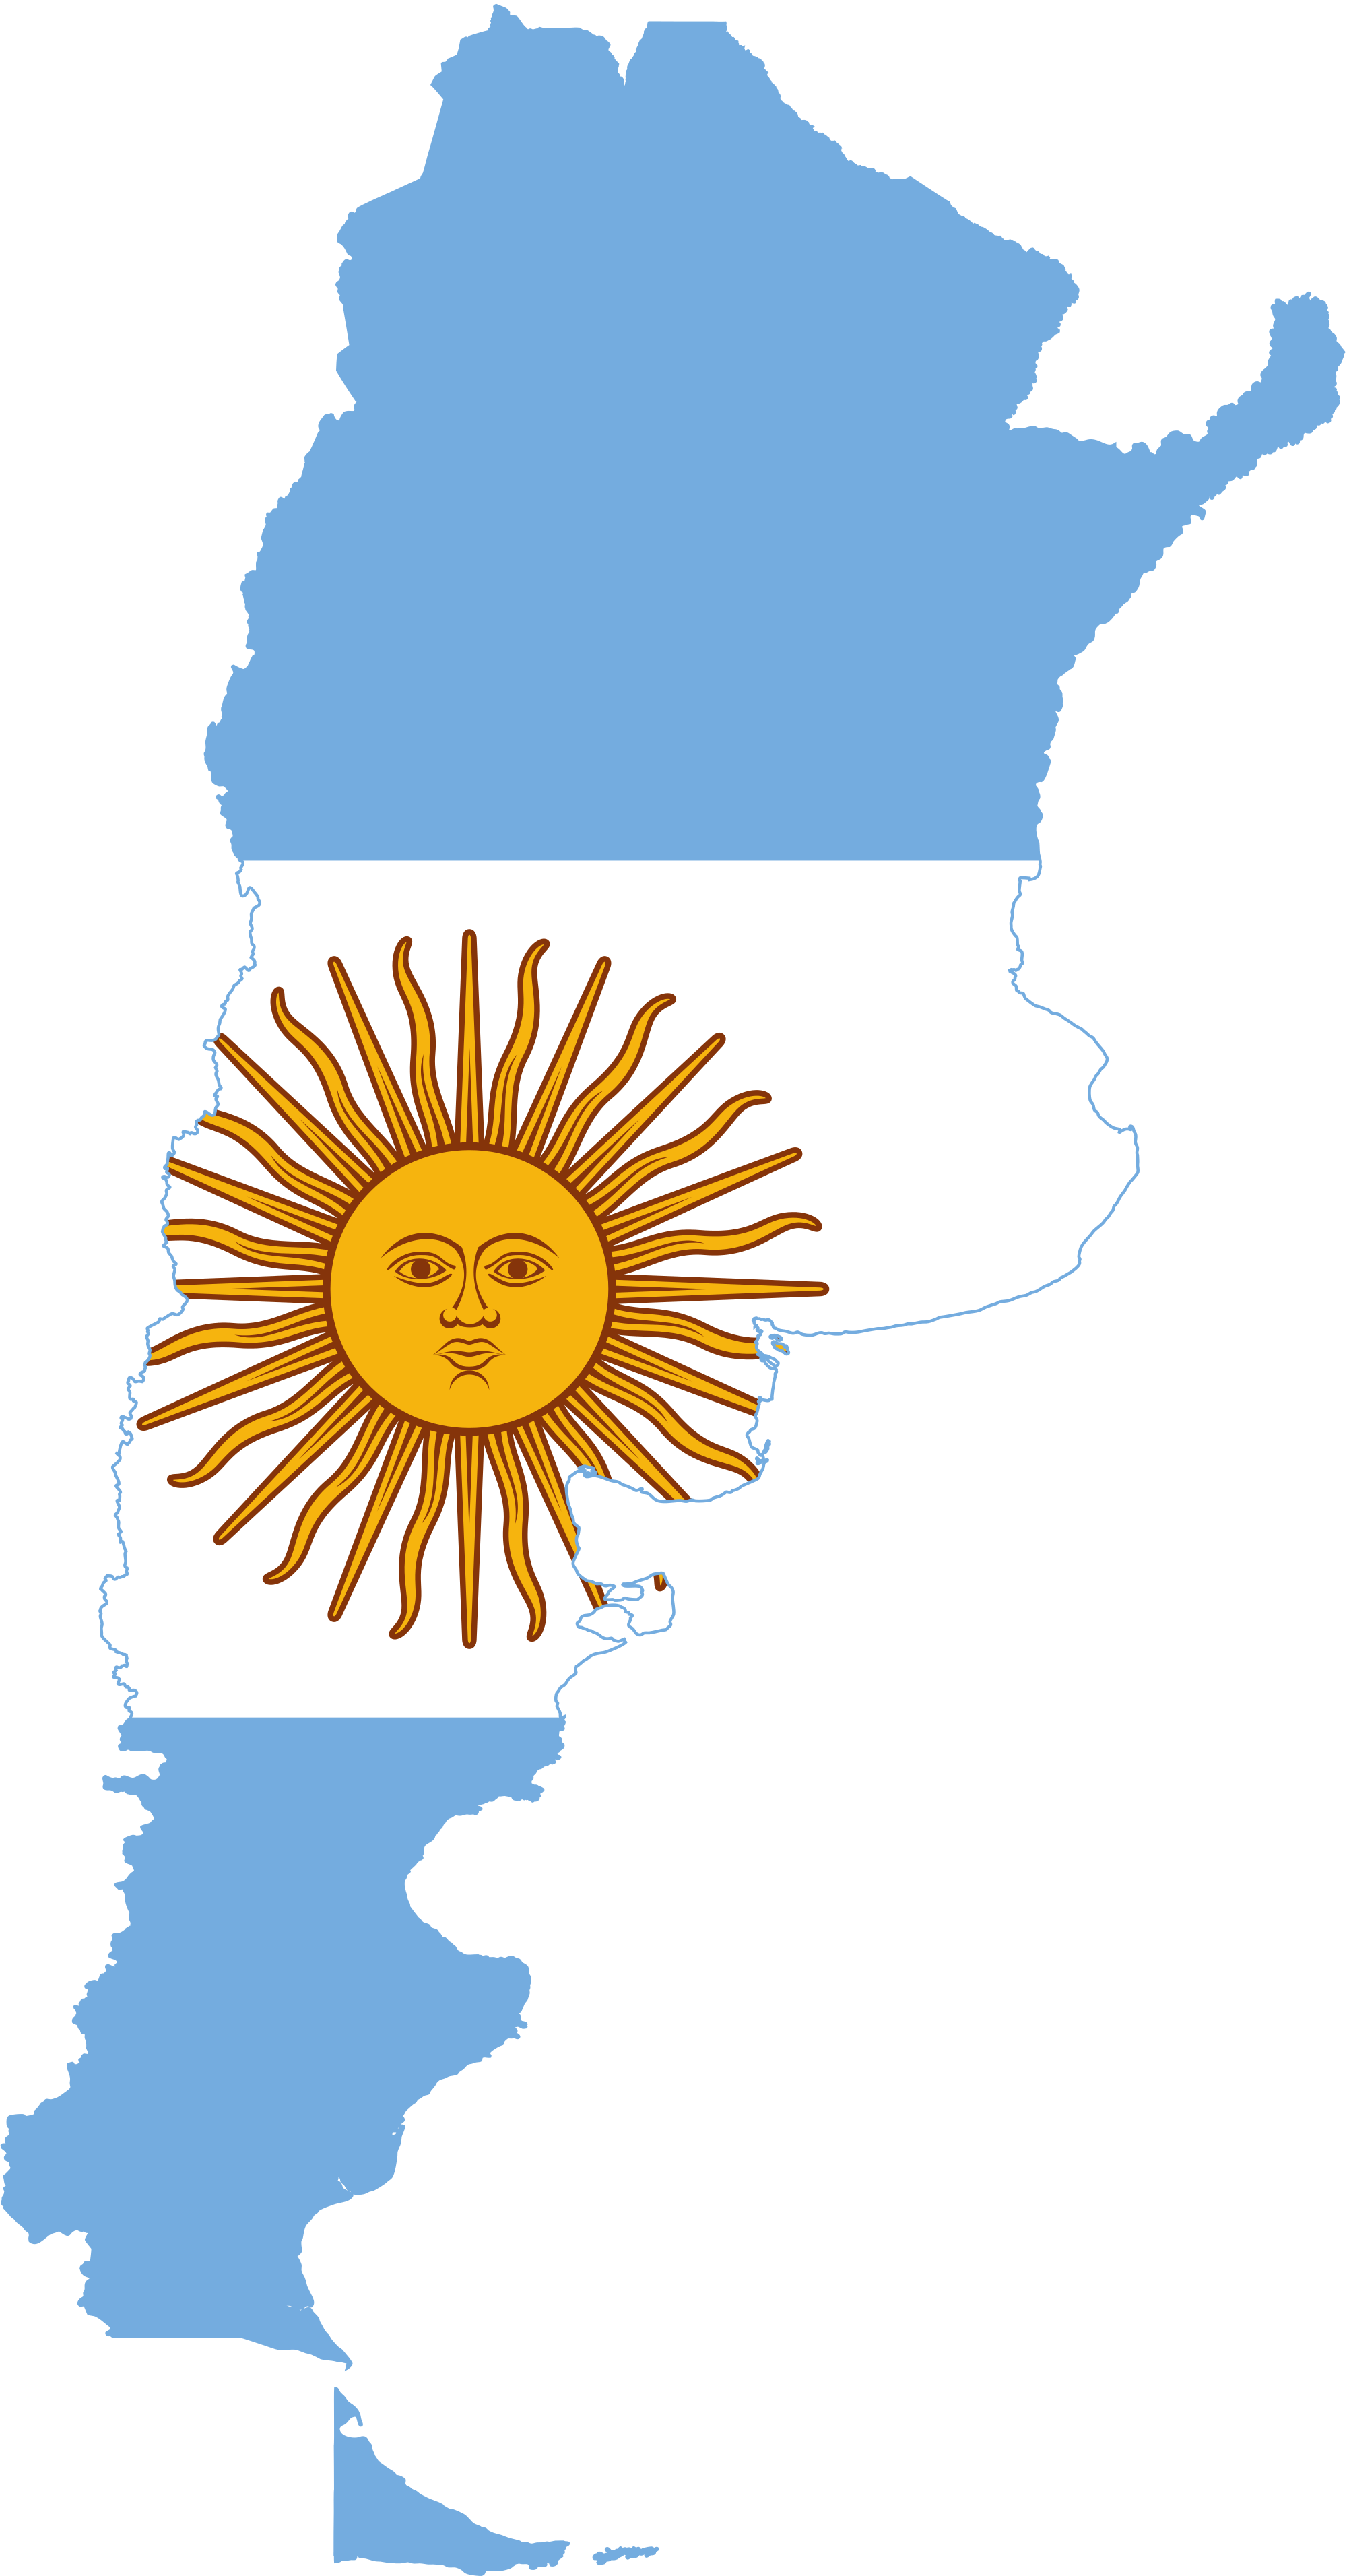 Argentinian Flag On Map - ClipArt Best